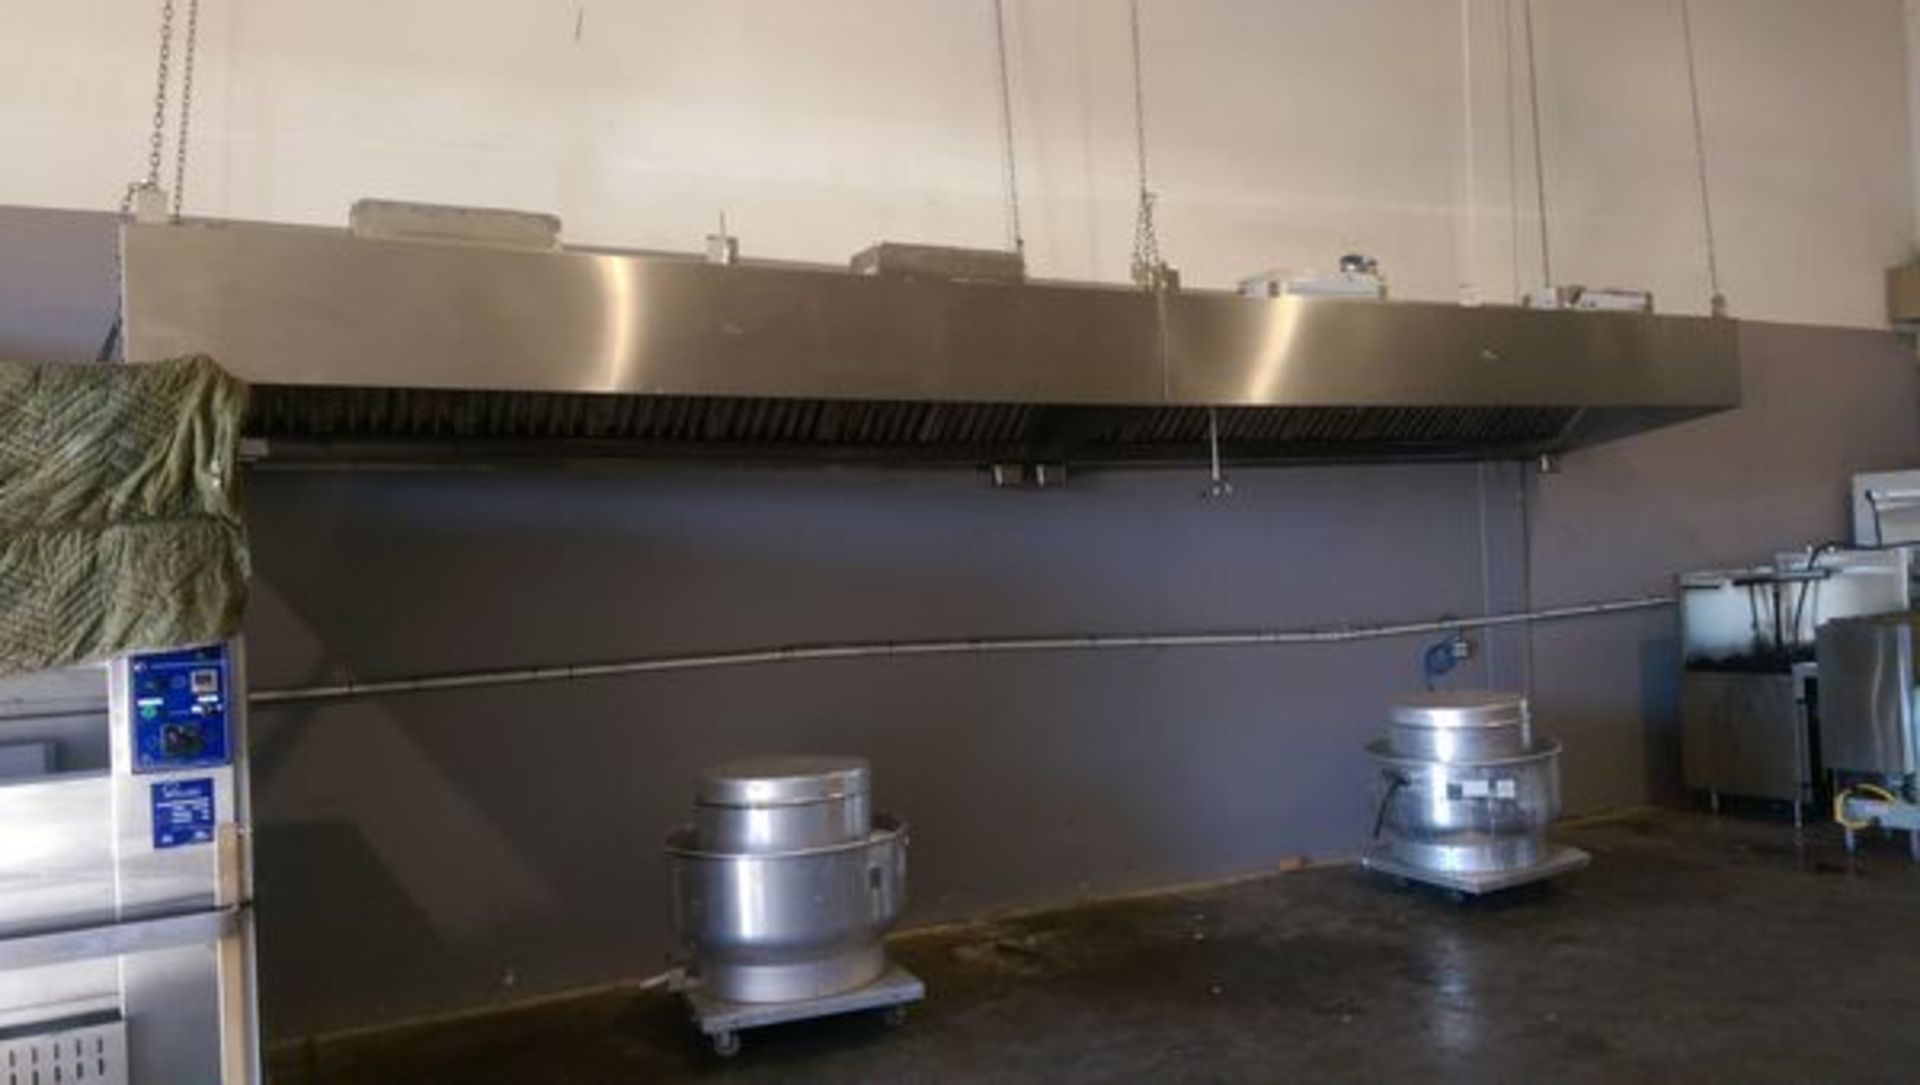 Approx. 140" NSC All Stainless Steel Canopy - Complete with Built In Air Return, Lights, Fire - Image 2 of 2